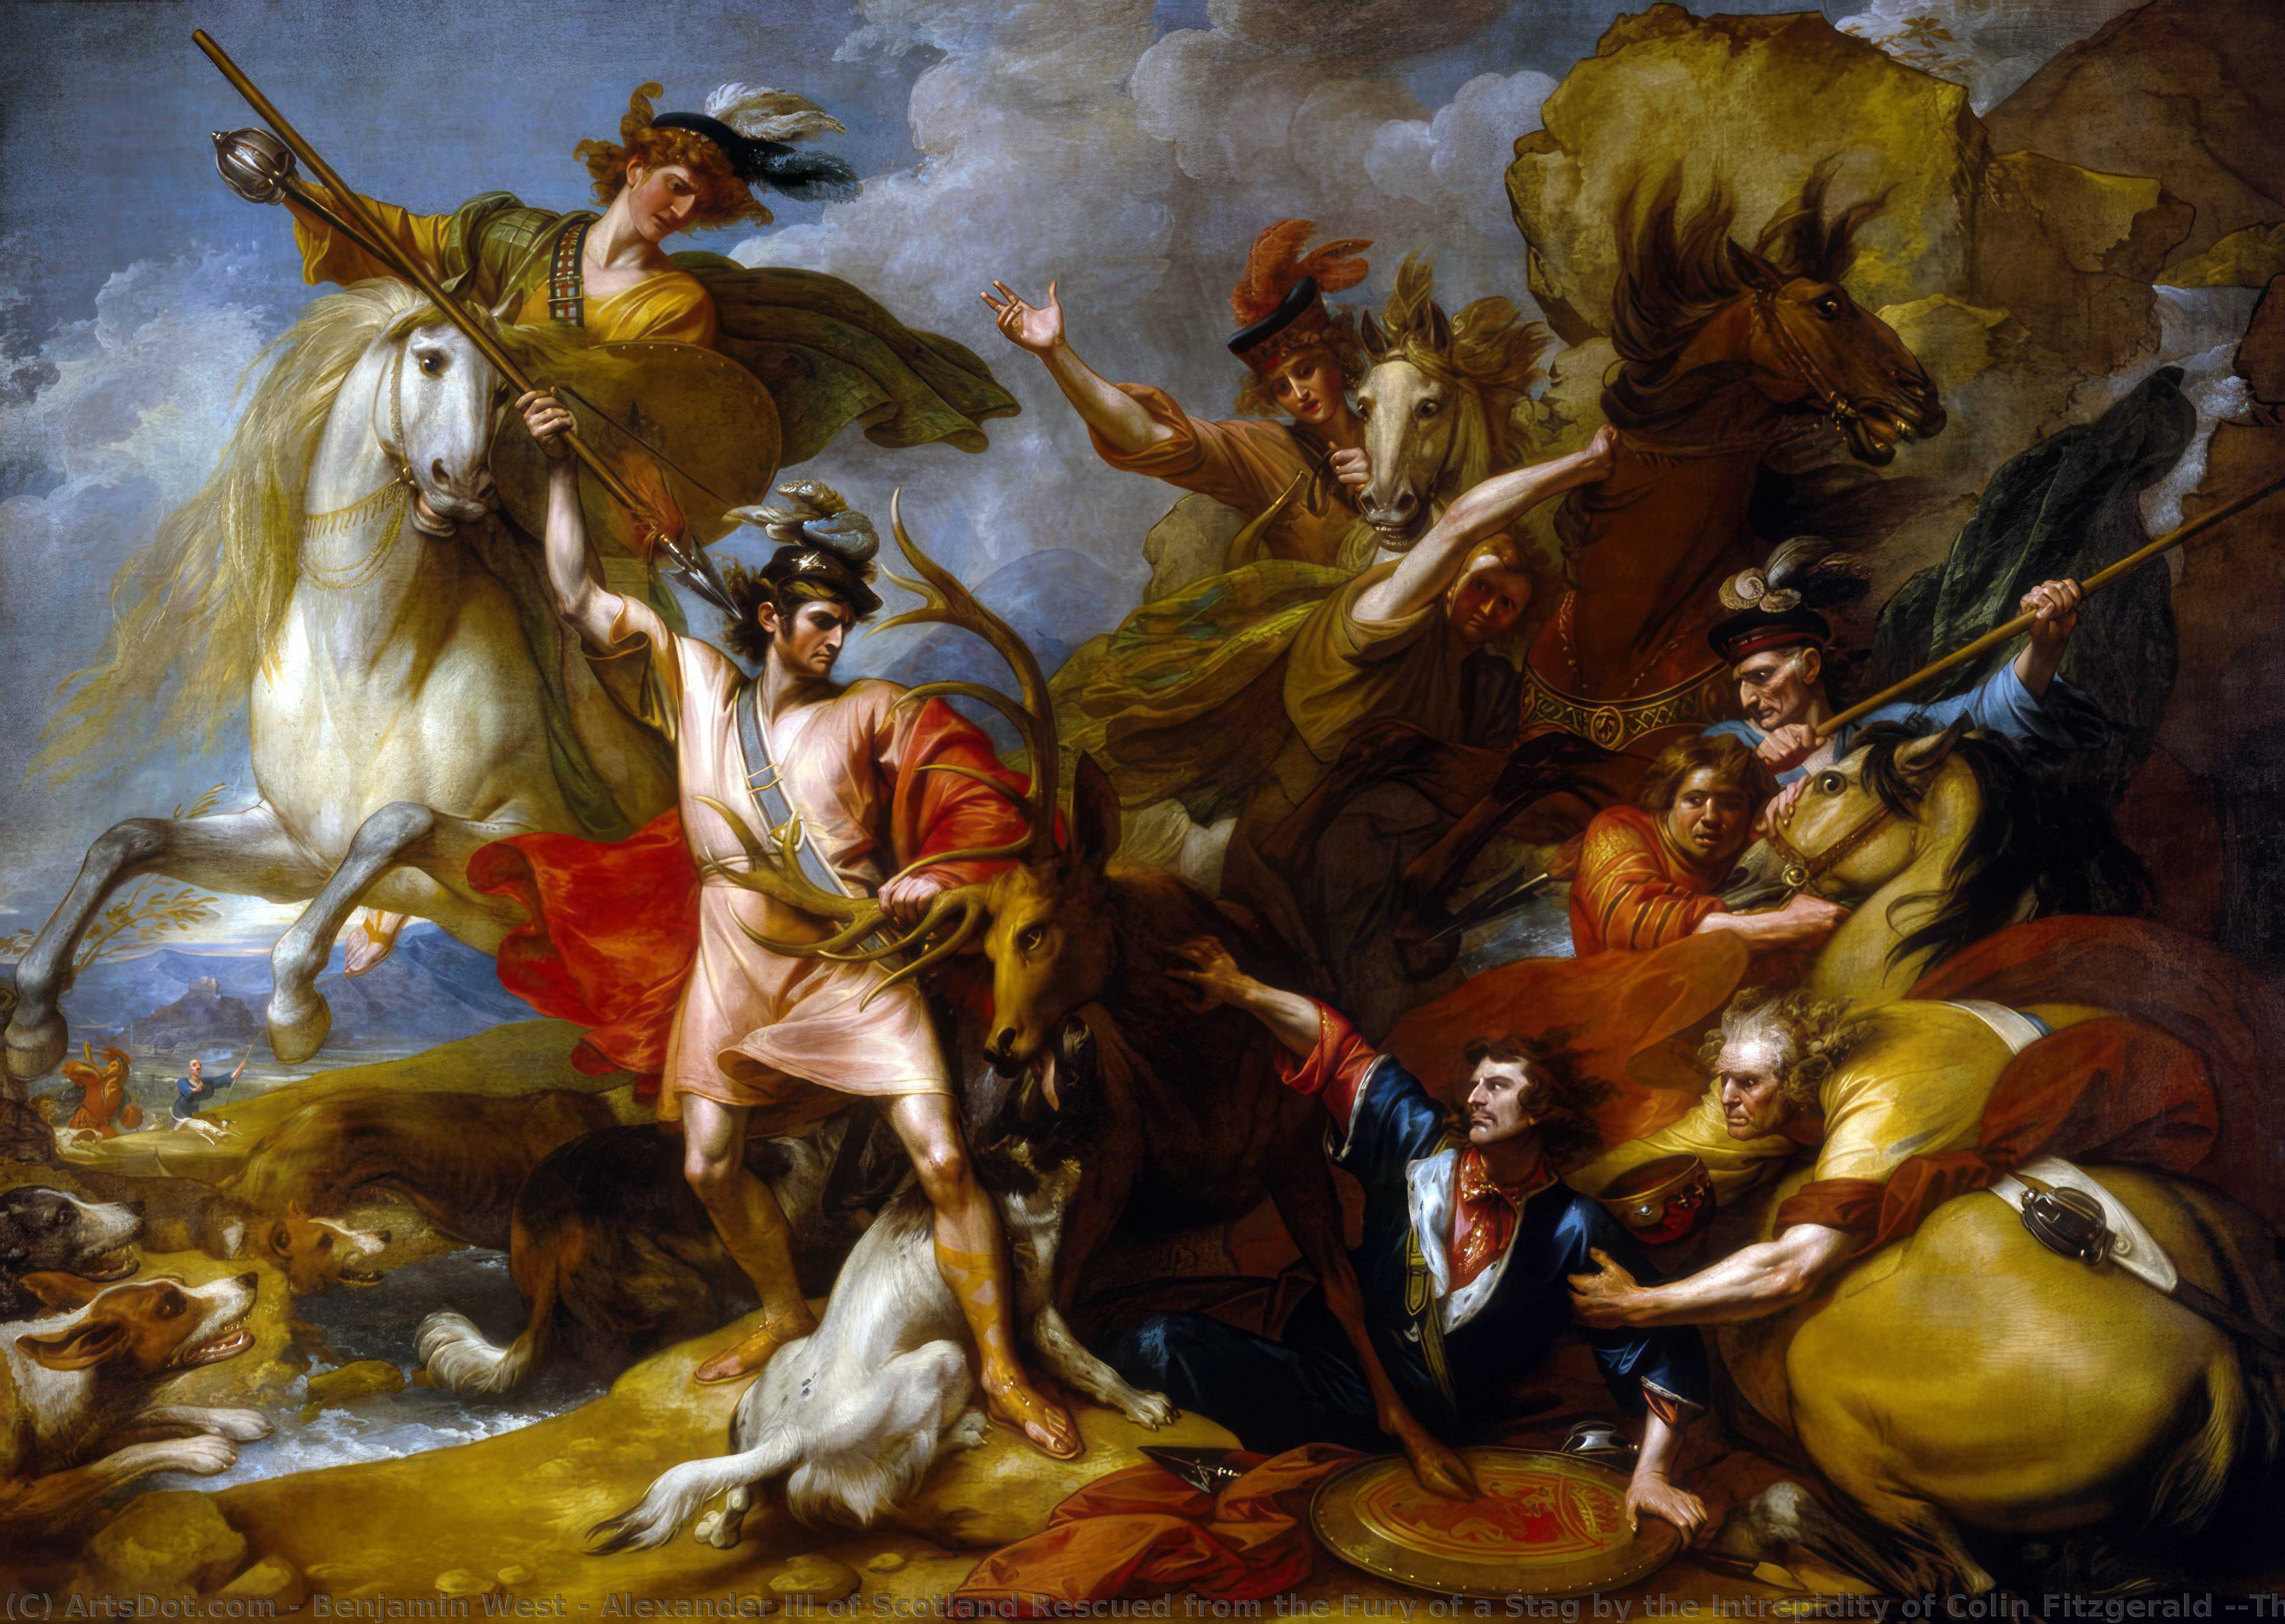 WikiOO.org - Encyclopedia of Fine Arts - Maalaus, taideteos Benjamin West - Alexander III of Scotland Rescued from the Fury of a Stag by the Intrepidity of Colin Fitzgerald ('The Death of the Stag')